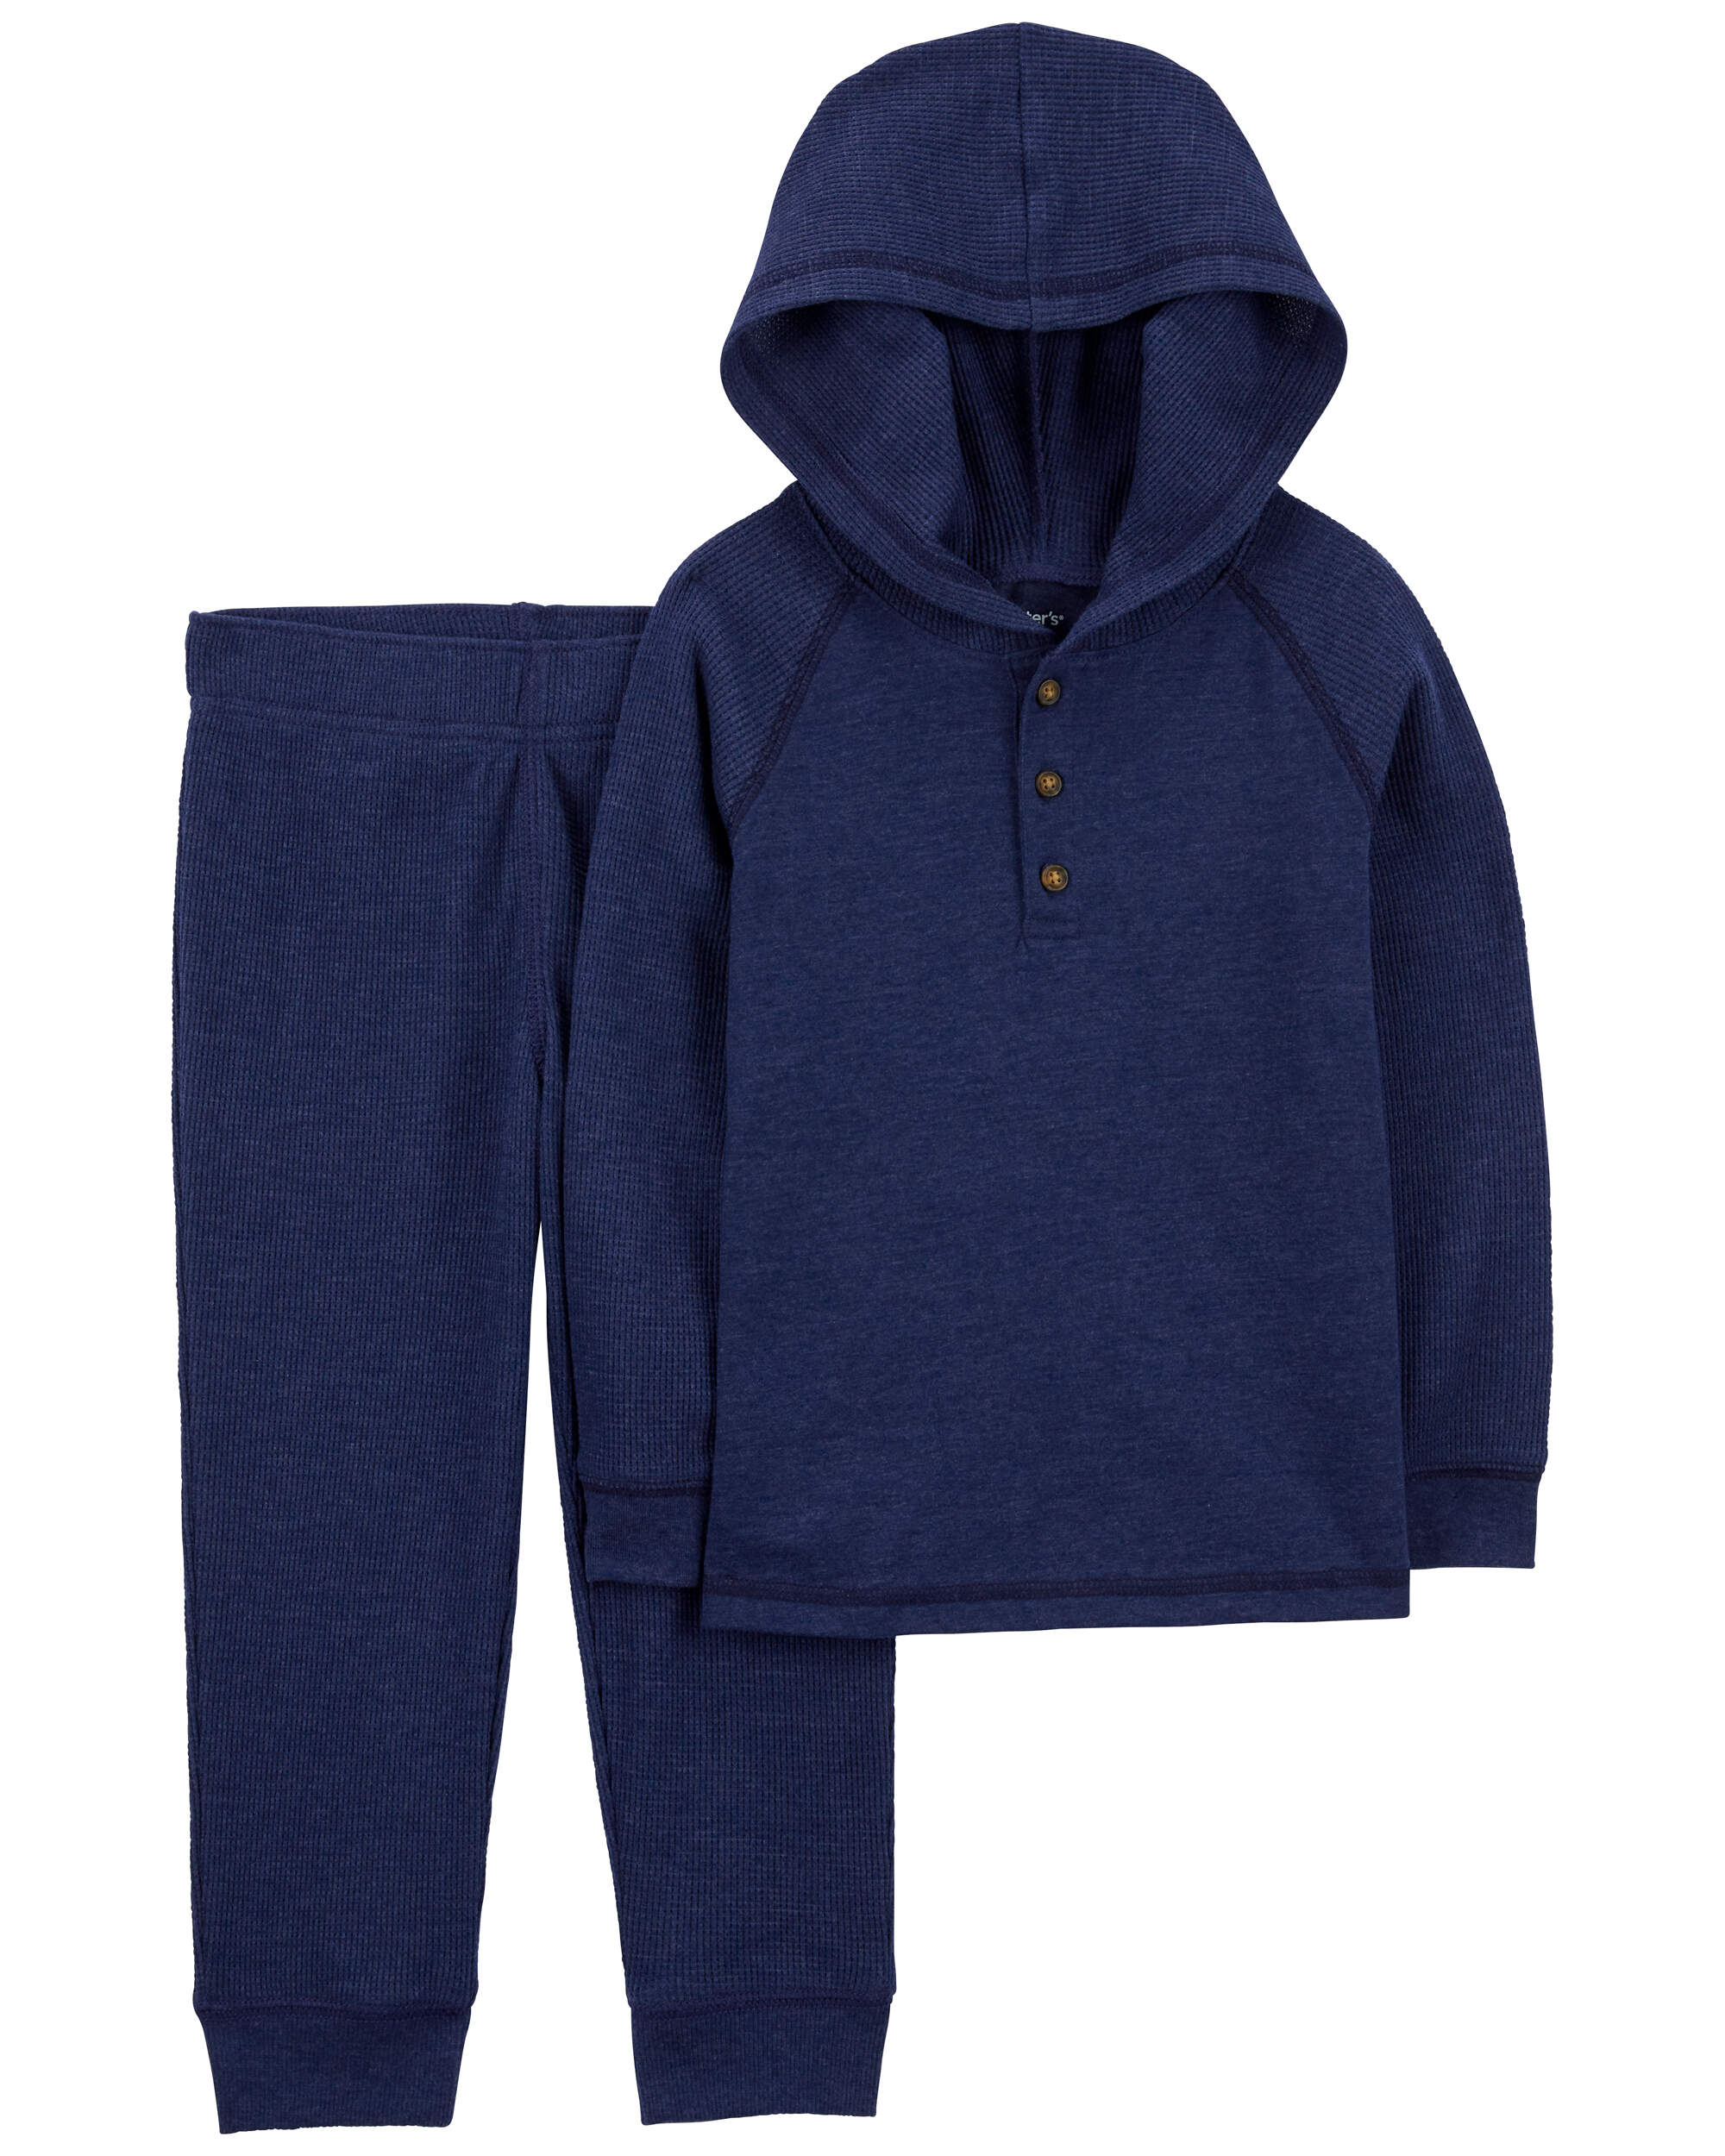 Toddler 2-Piece Thermal Hooded Tee & Jogger Set